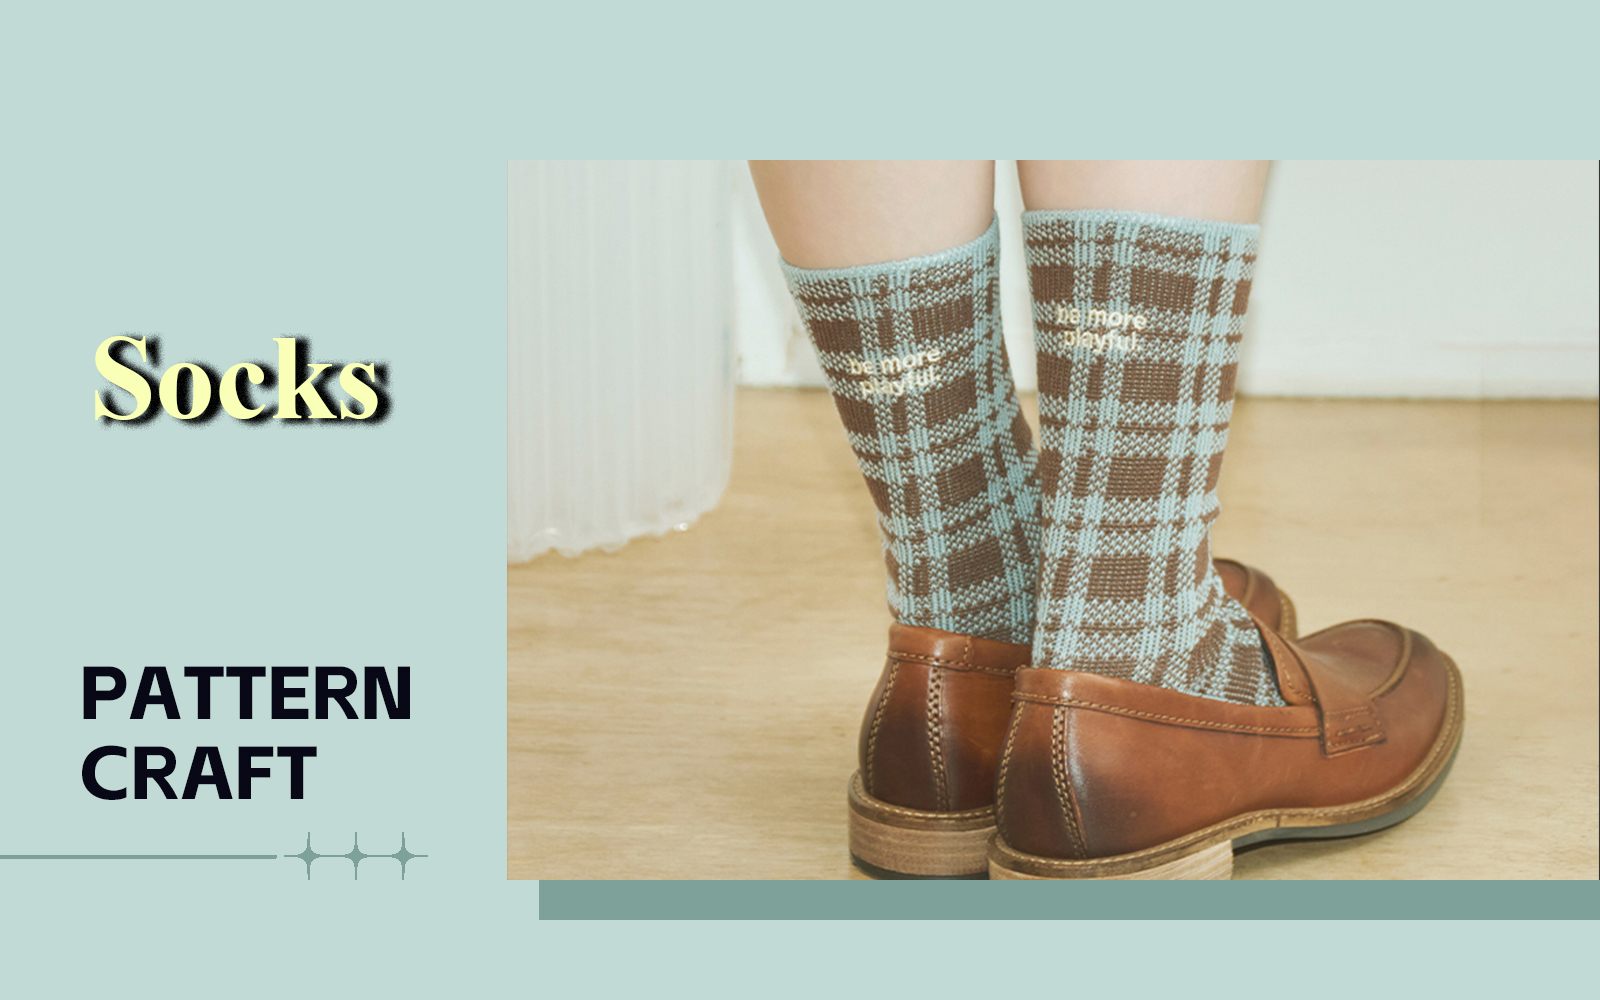 The Pattern Craft Trend for Socks